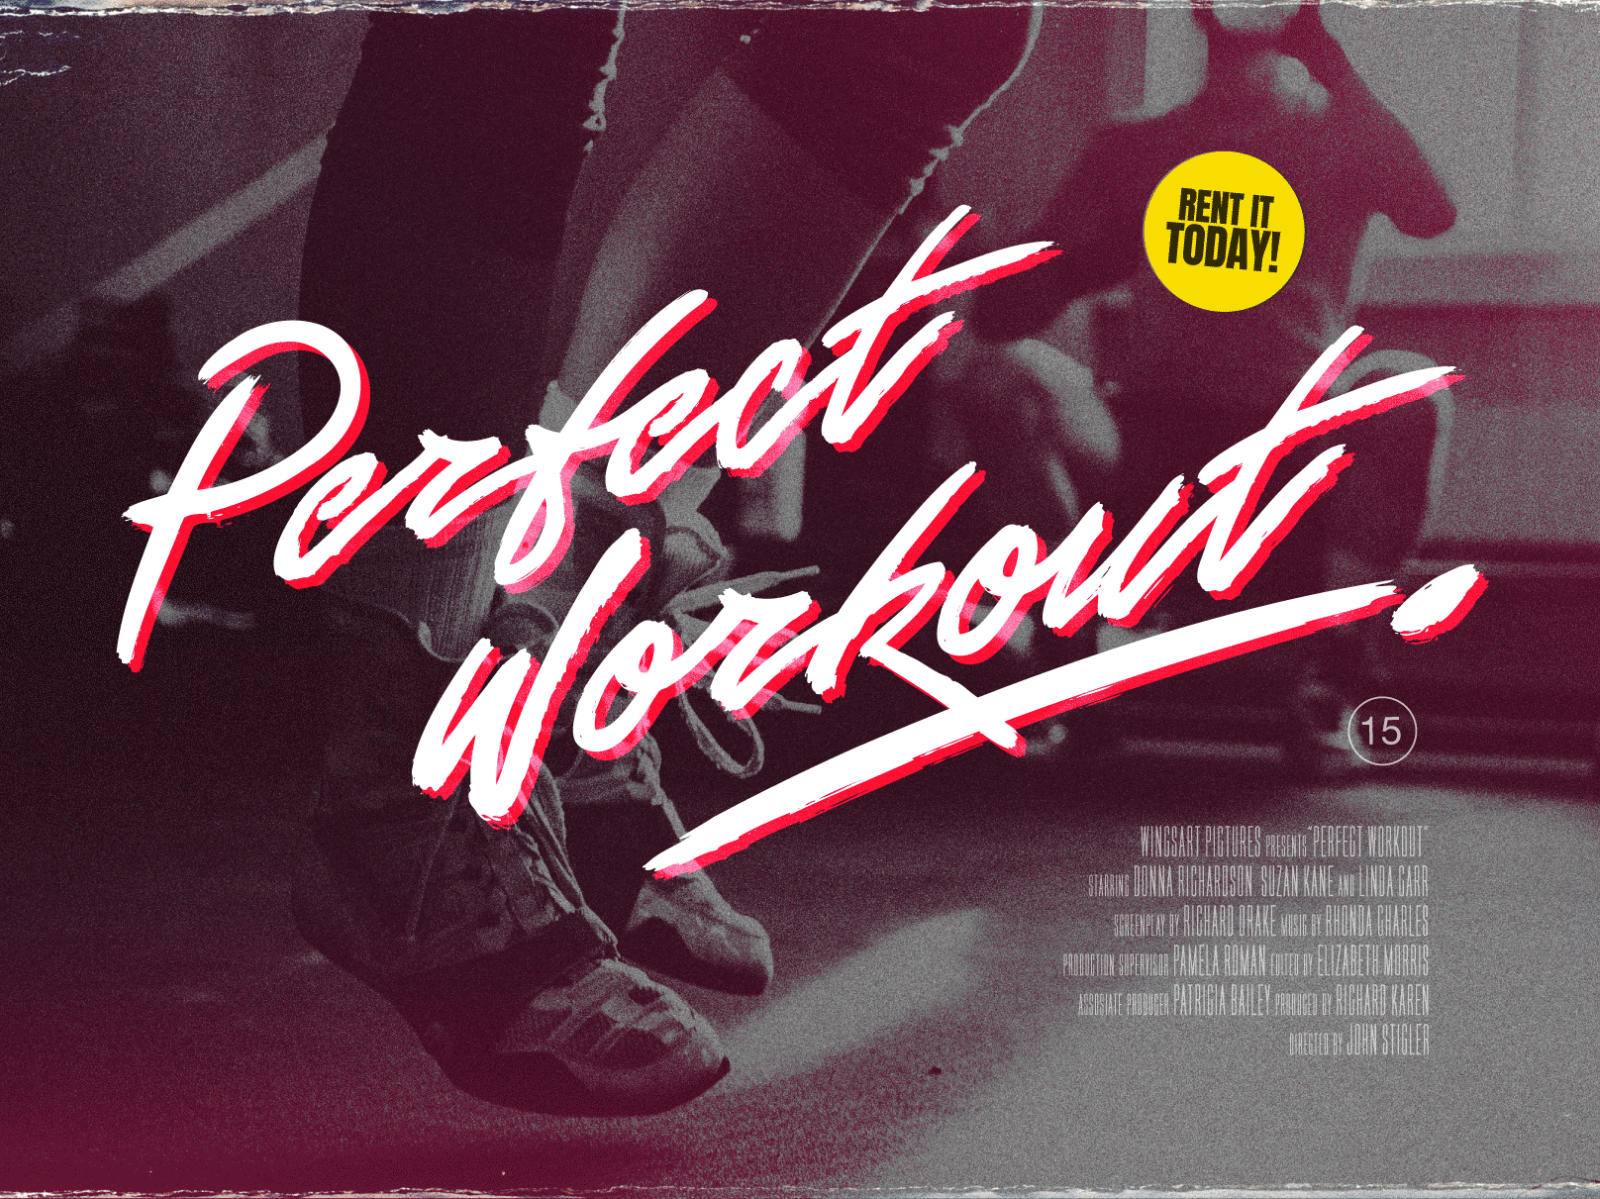 Perfect Workout - 80s Inspired Script Font by Christopher King on ...